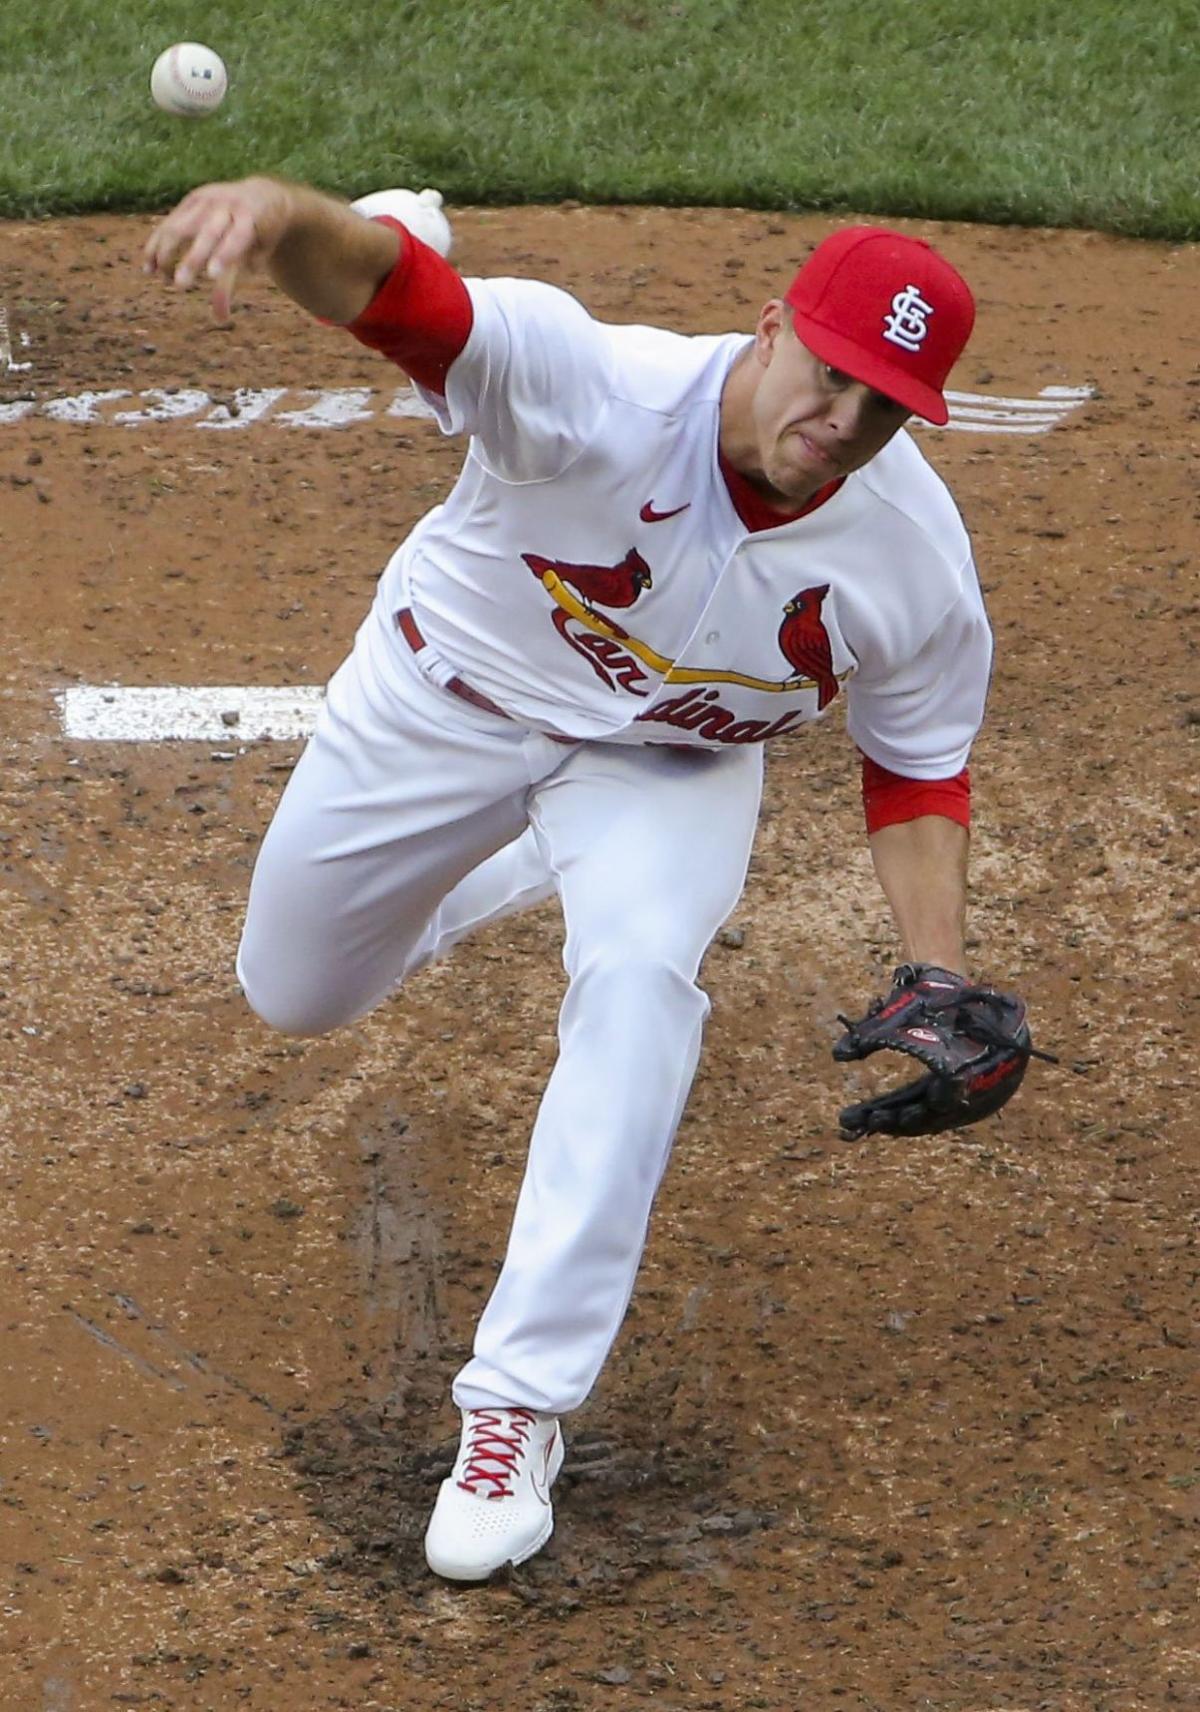 Welcome home, Nolan: Arenado homers to lift Cardinals to late, 3-1 victory  in Busch opener